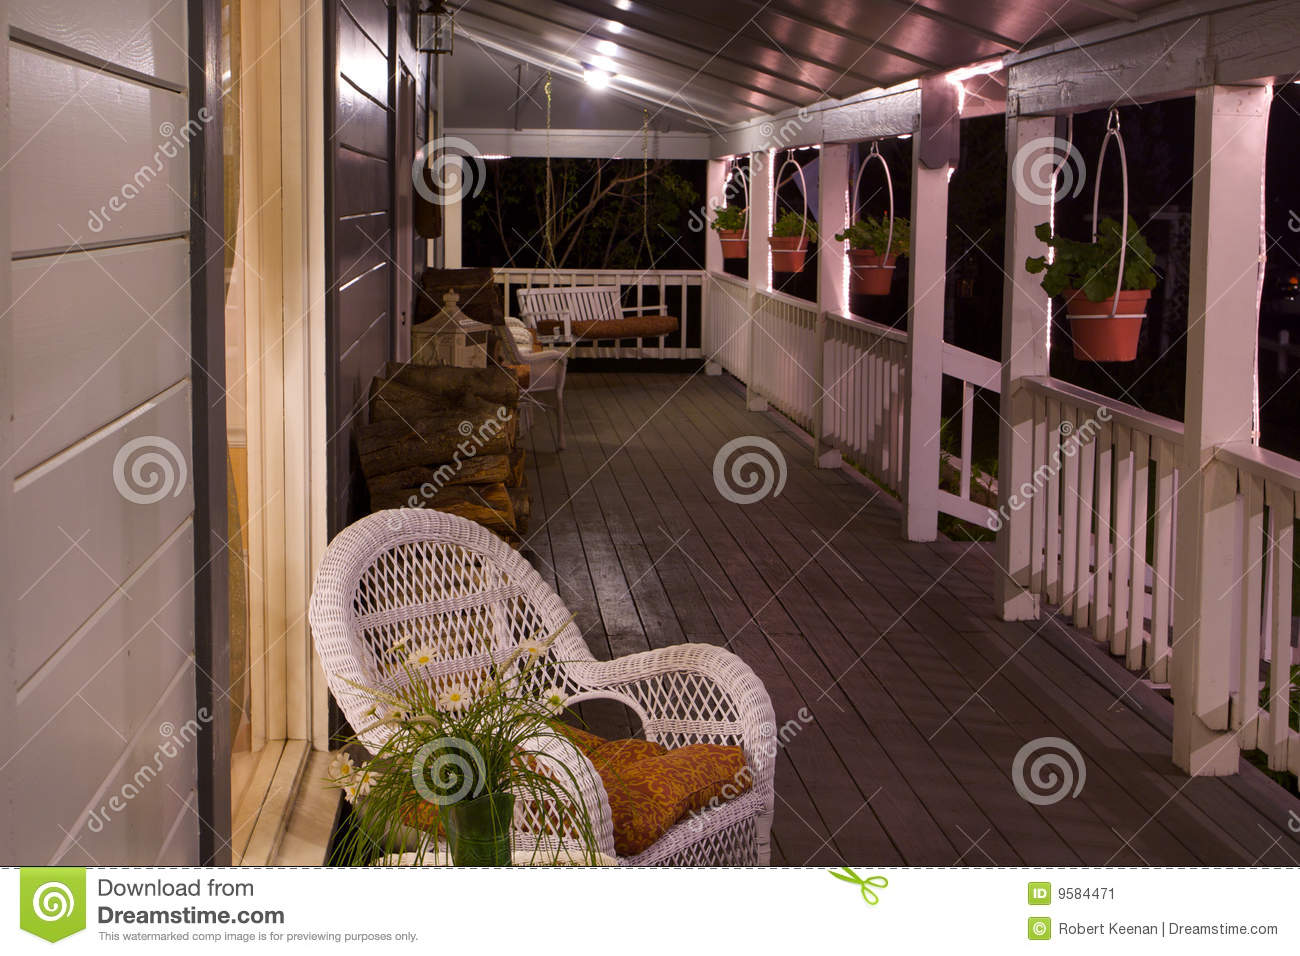 Country Front Porch At Night Horizontal Stock Image   Image  9584471